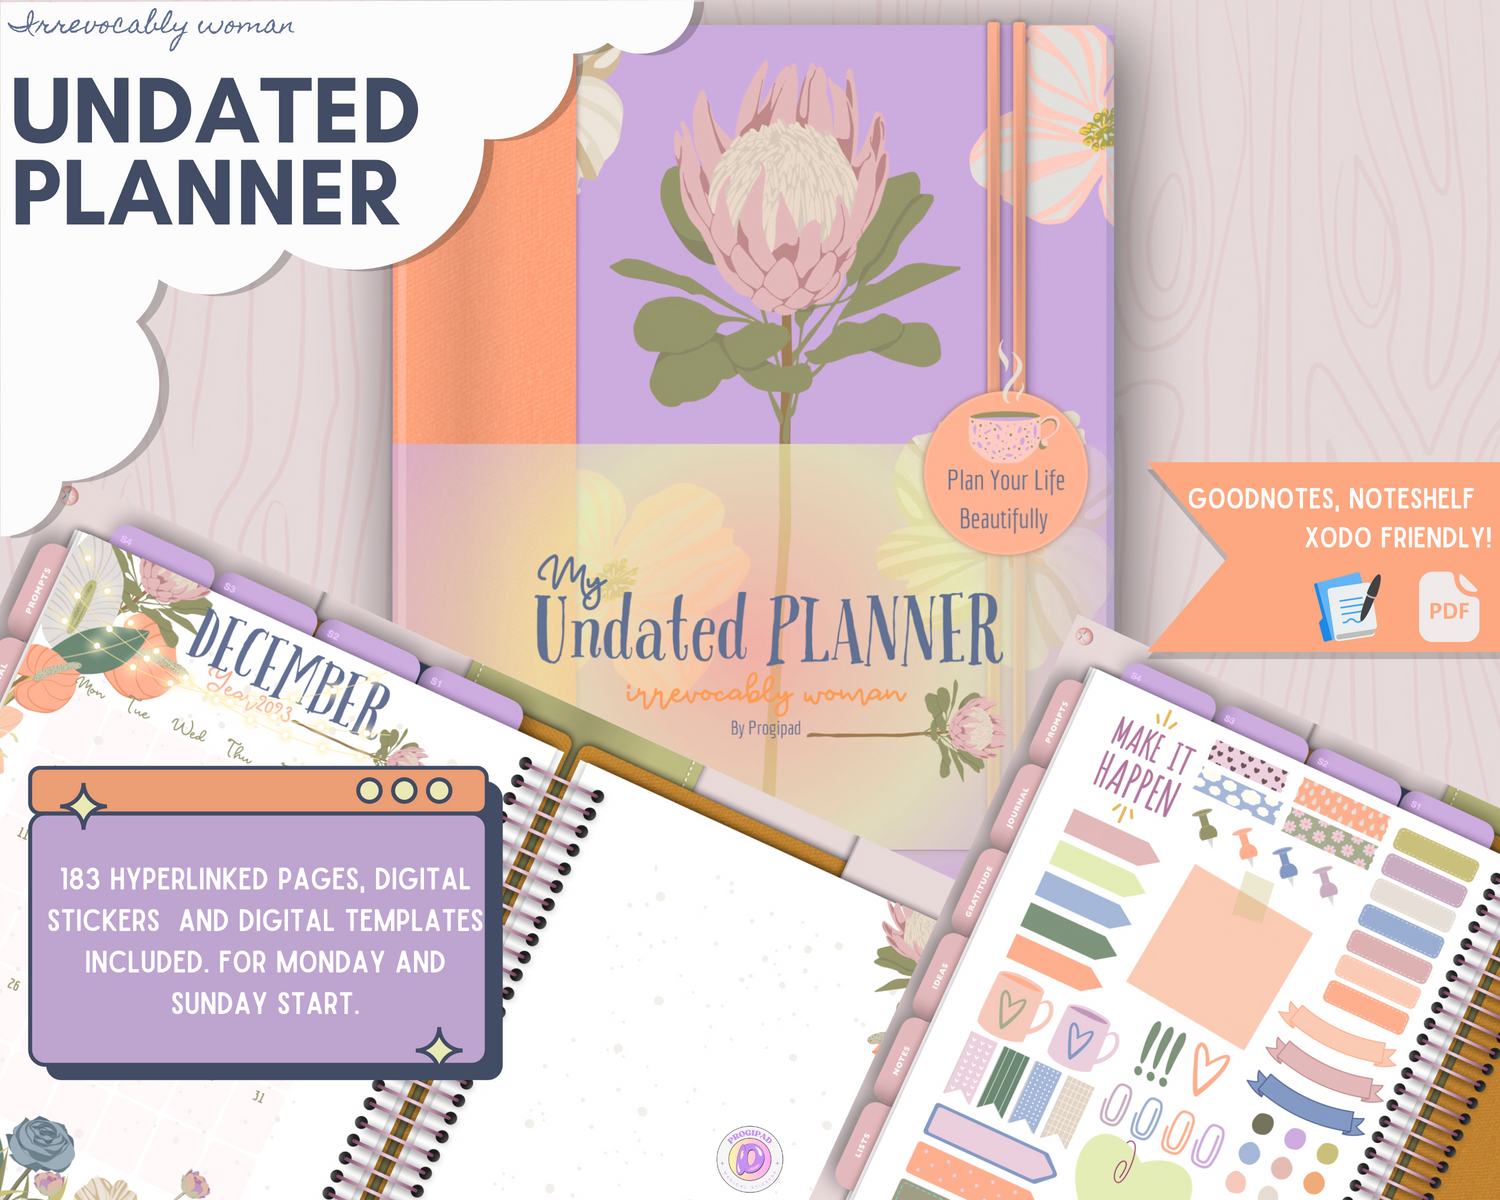 Undated digital planner, irrevocably woman.